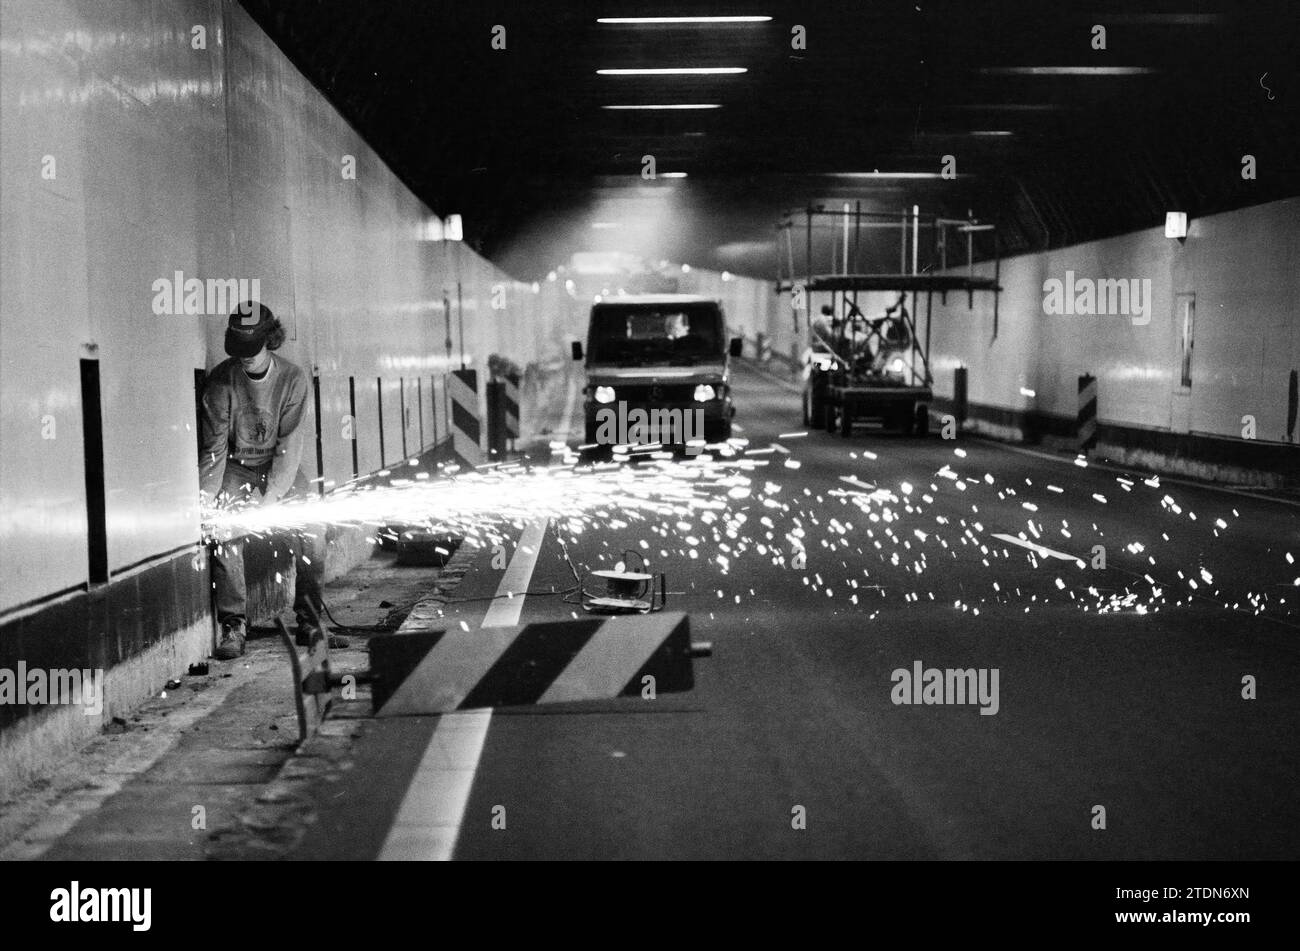 Work in the Velsertunnel, 00-05-1990, Whizgle News from the Past, Tailored for the Future. Explore historical narratives, Dutch The Netherlands agency image with a modern perspective, bridging the gap between yesterday's events and tomorrow's insights. A timeless journey shaping the stories that shape our future Stock Photo